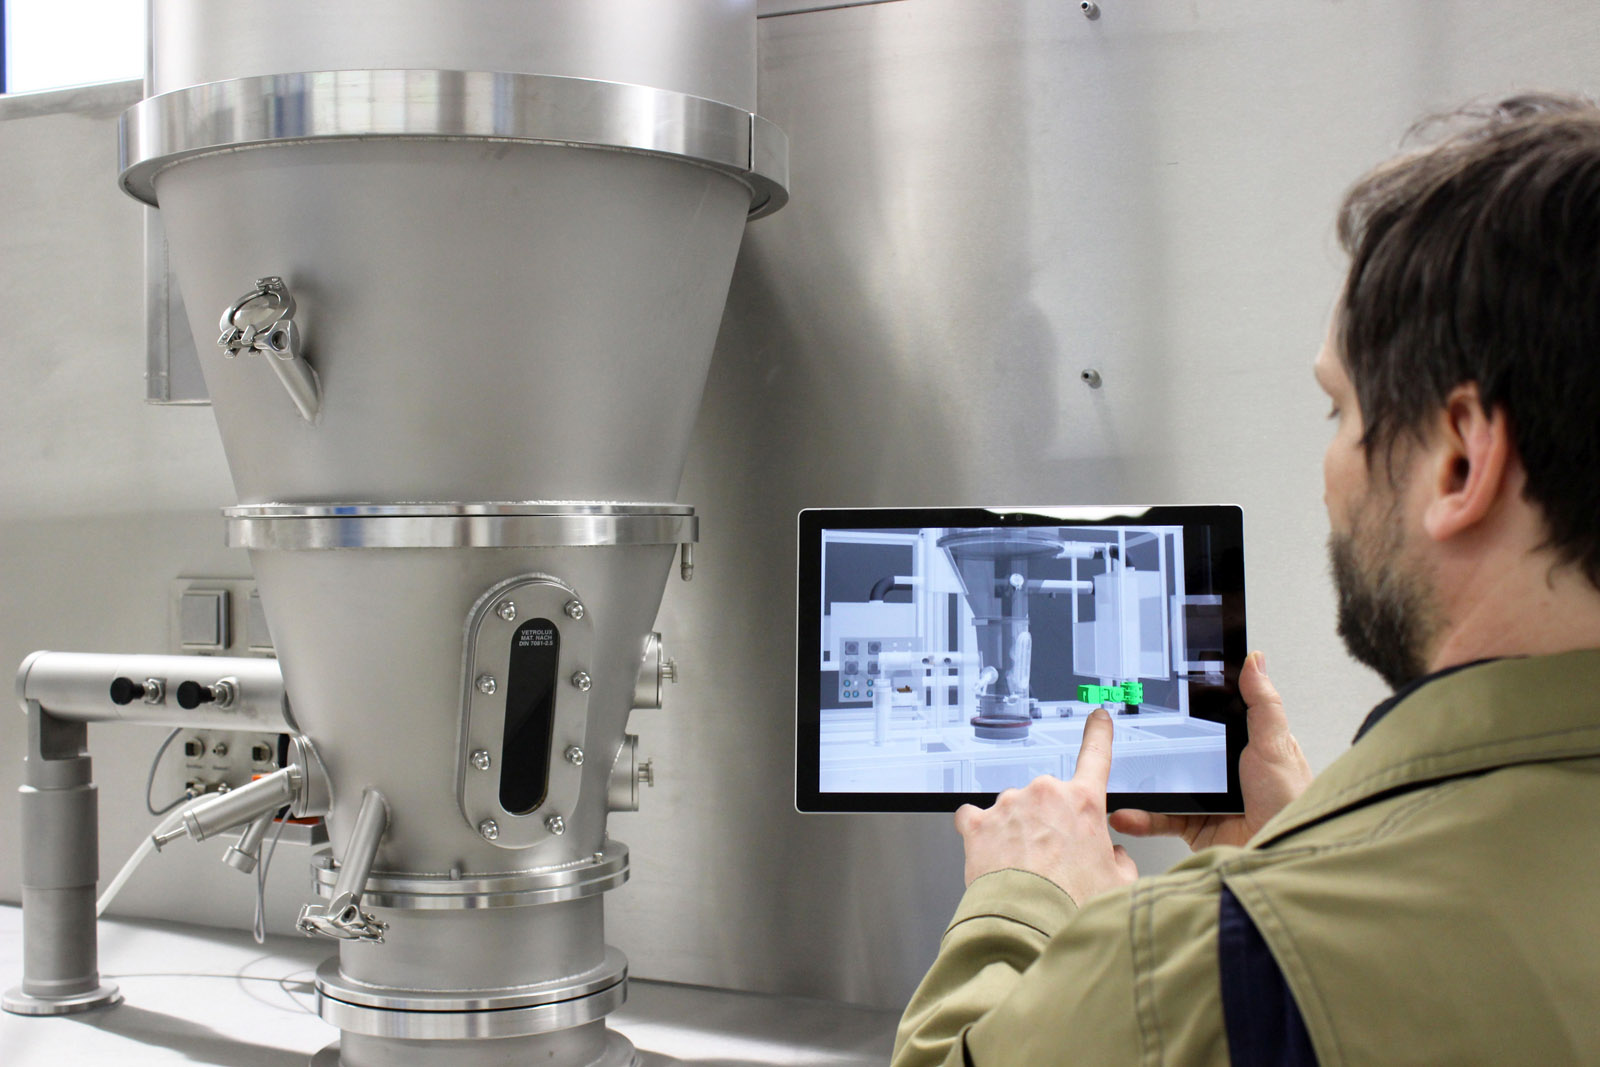 Digital plant monitoring for predictive maintenance. The requisite interconnectivity of plants is based on their digital twin.